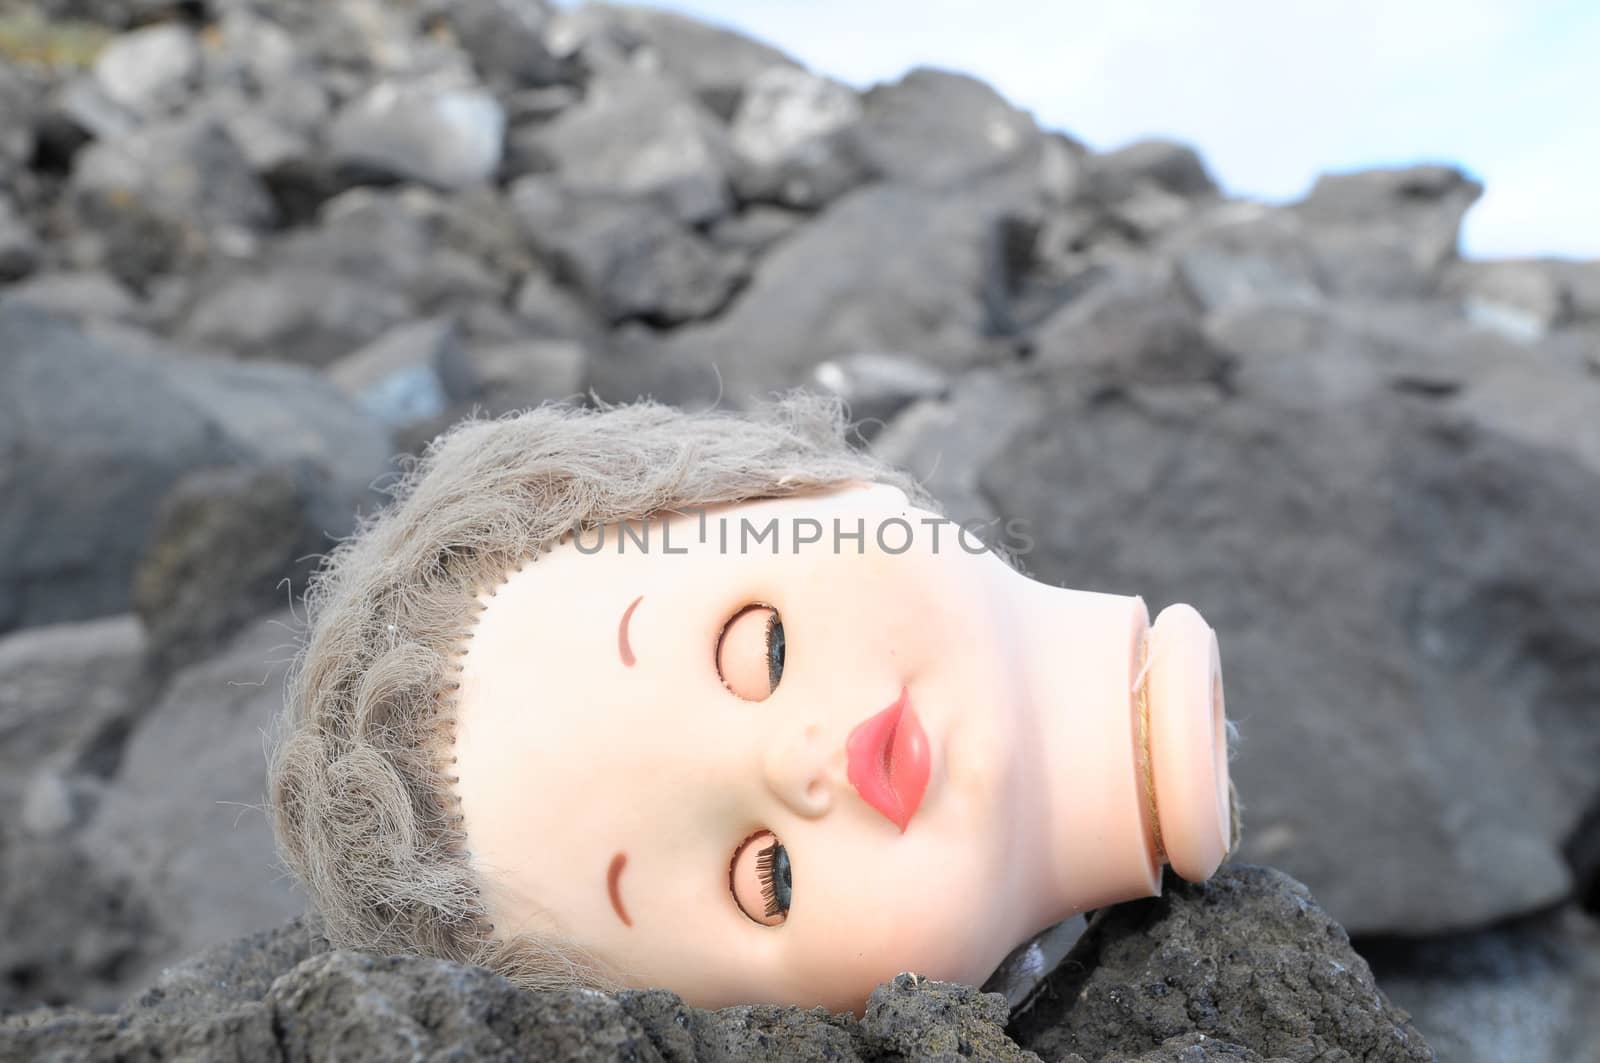 One Ancient Dool's Head Abandoned on the Rocks